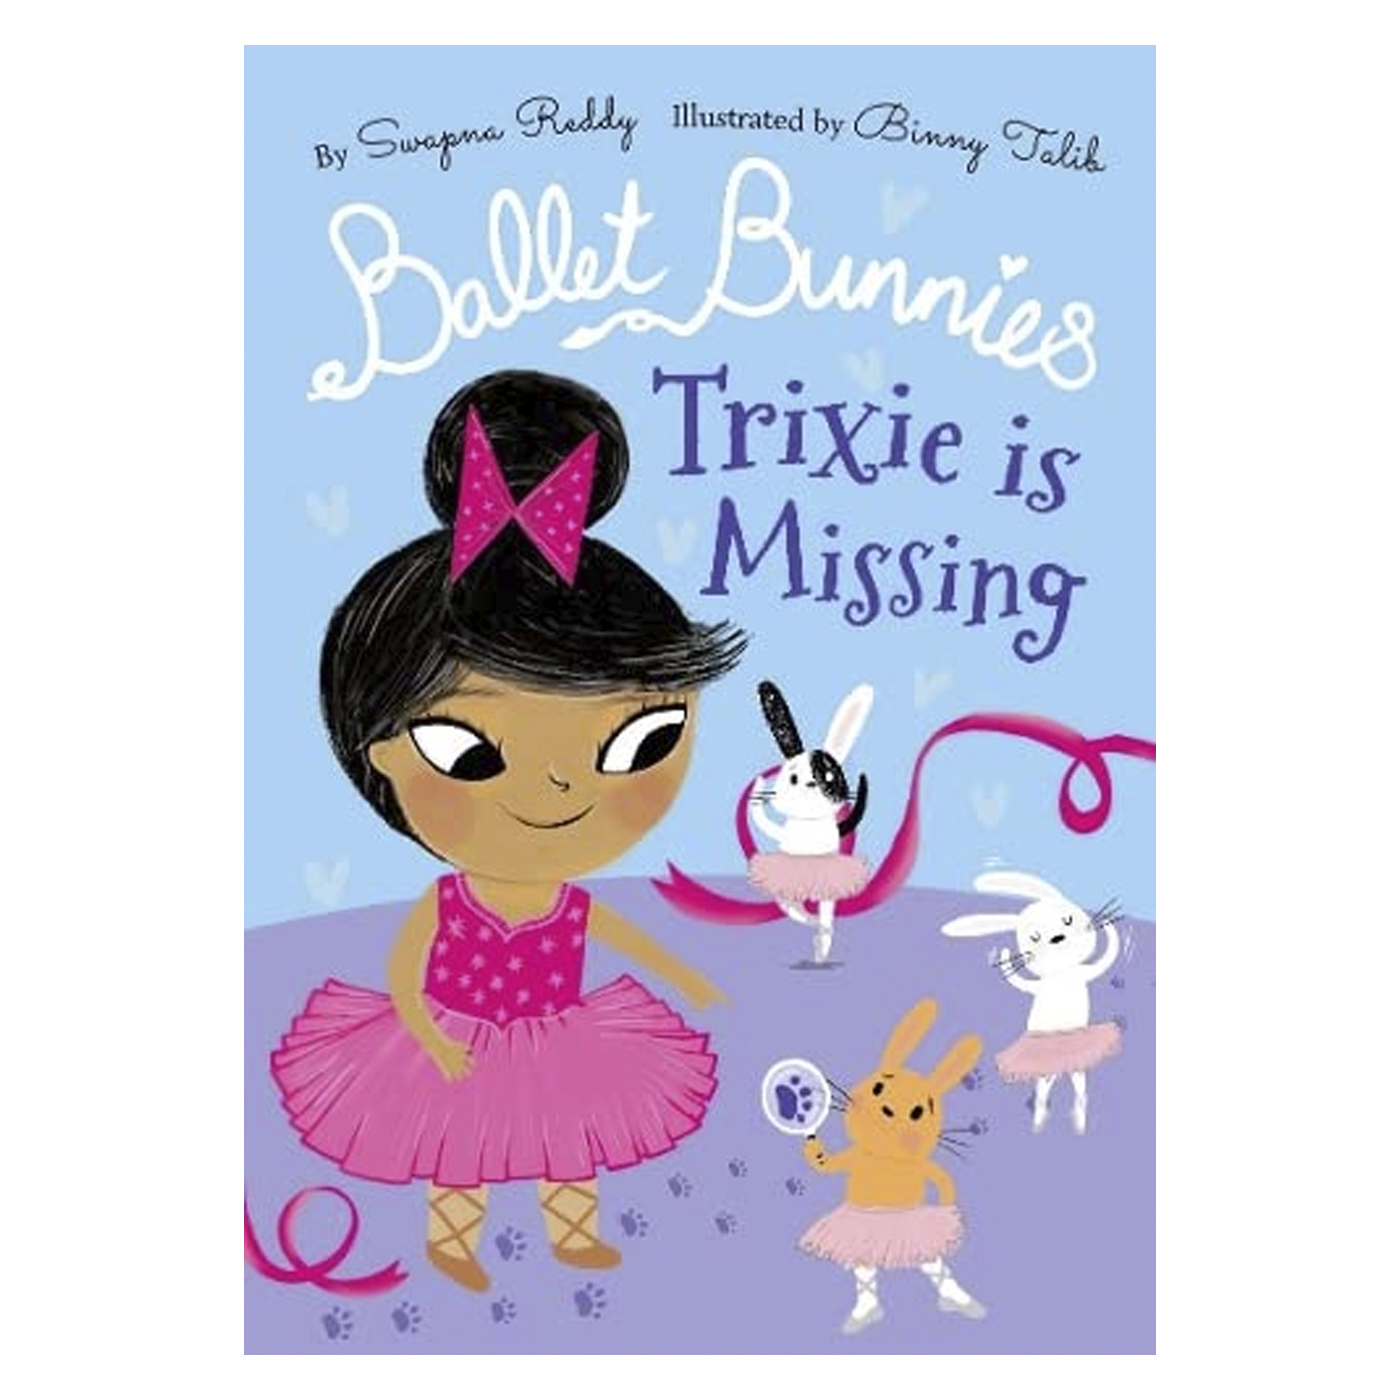  Ballet Bunnies: Trixie Is Missing